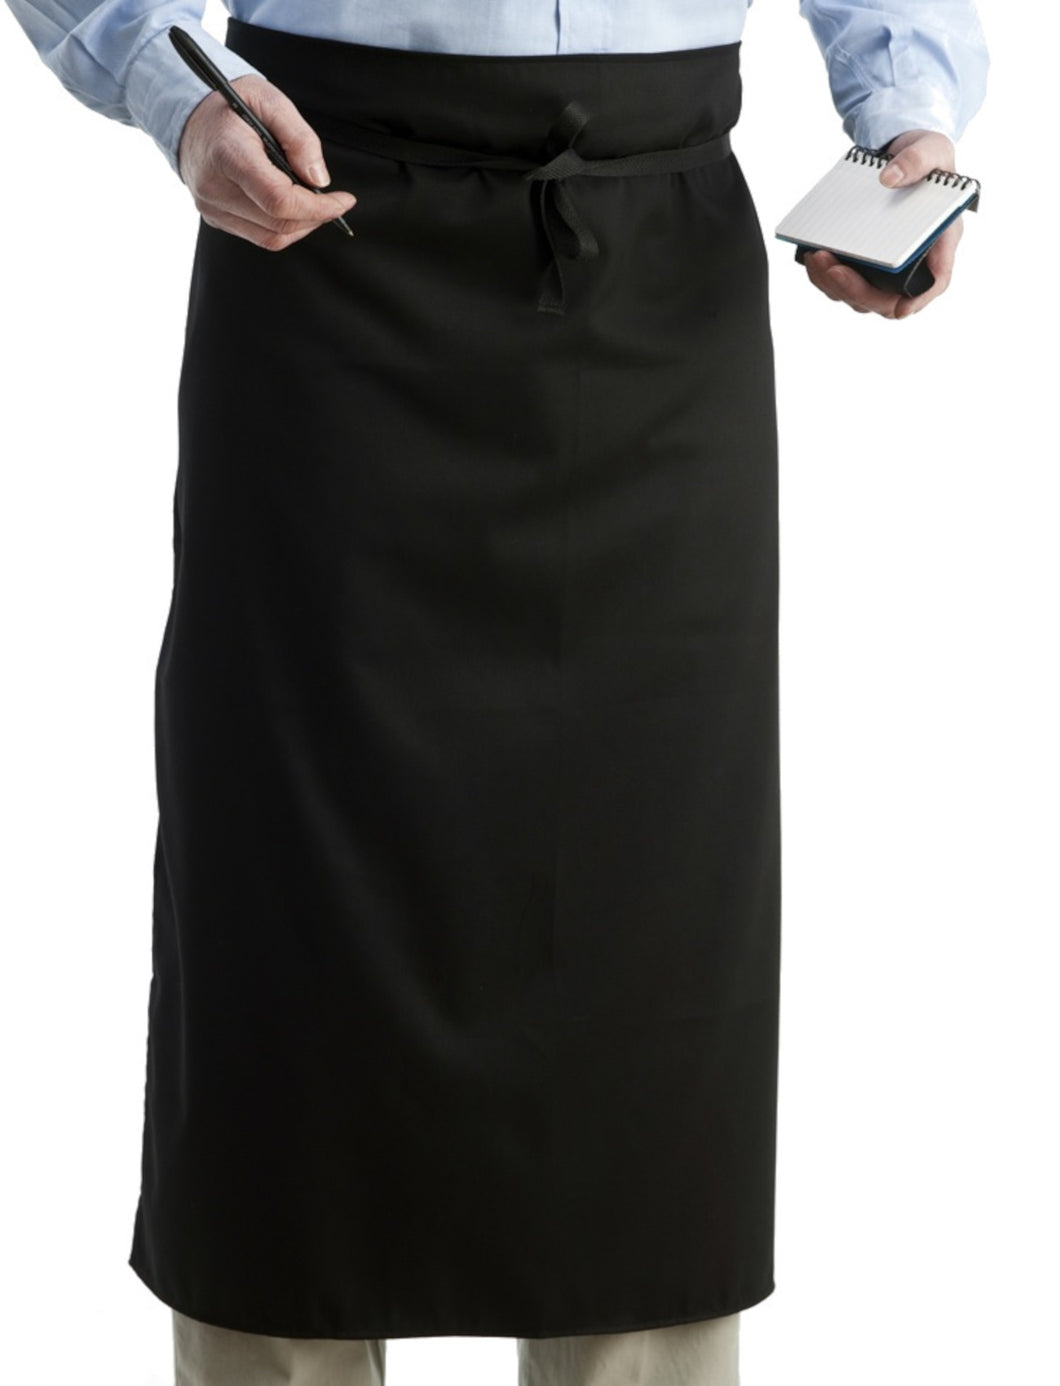 Black Waist Polycotton Apron (Pack of 1 or 5)